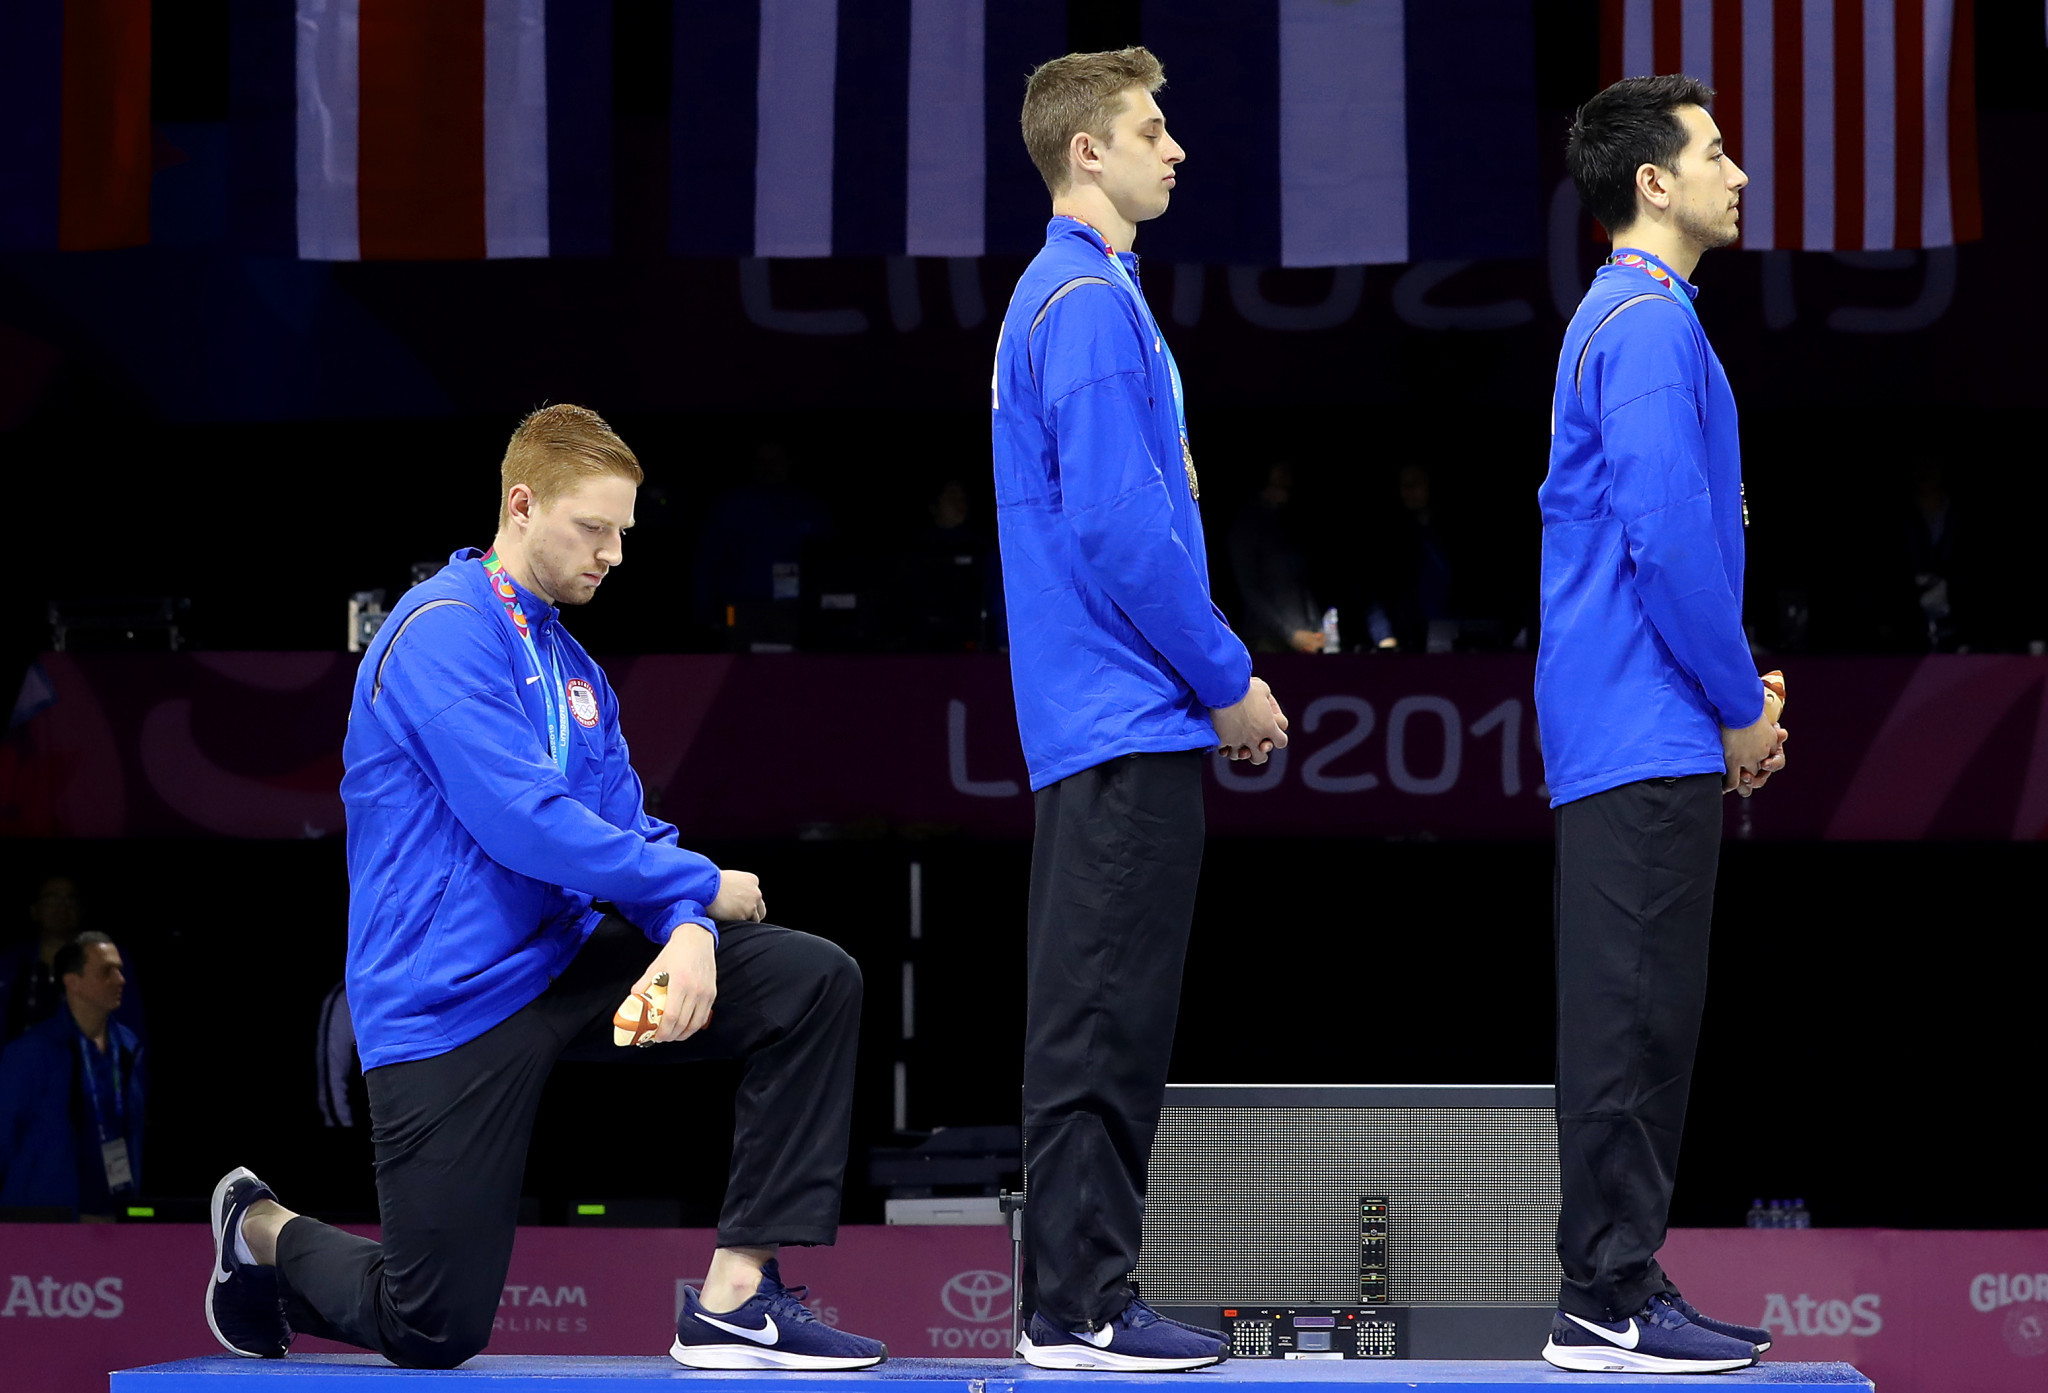 Race Imboden, left, was one of two US athletes who protested on the Lima 2019 podium ©Getty Images